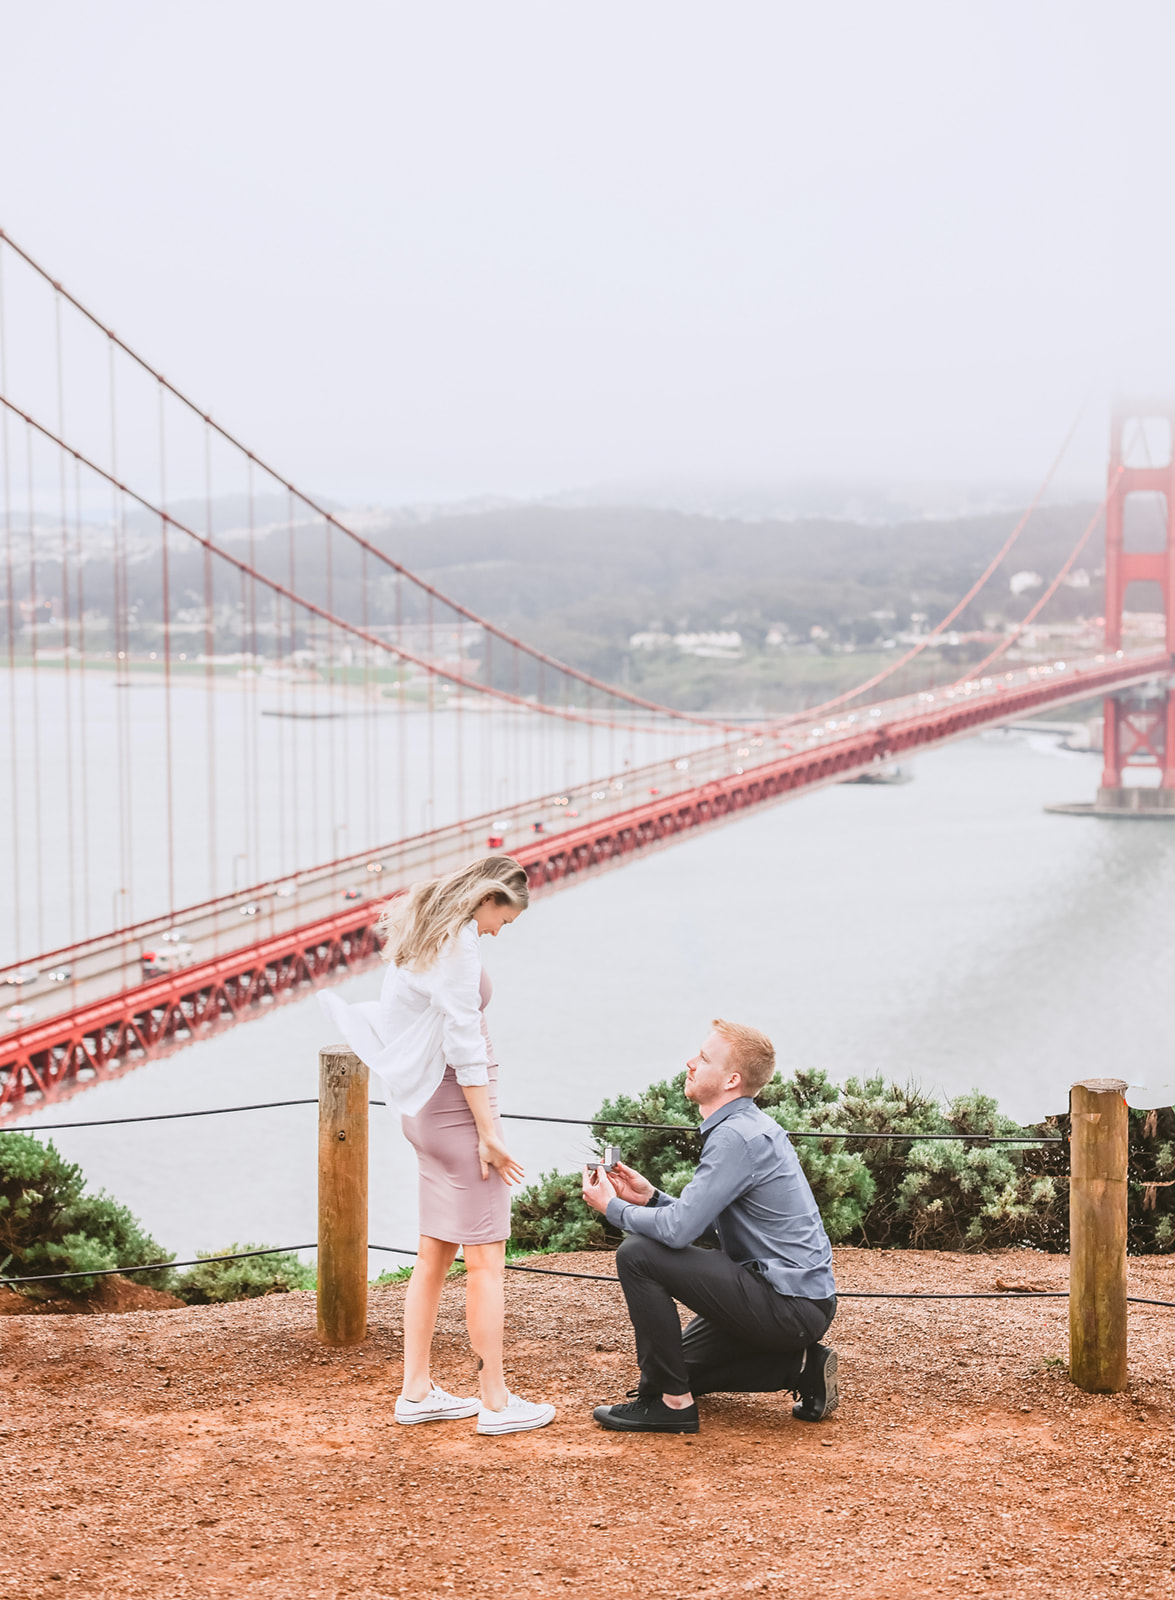 Proposal engagement photography at Battery Spencer with Golden Gate Bridge on a cloudy day in San Francisco